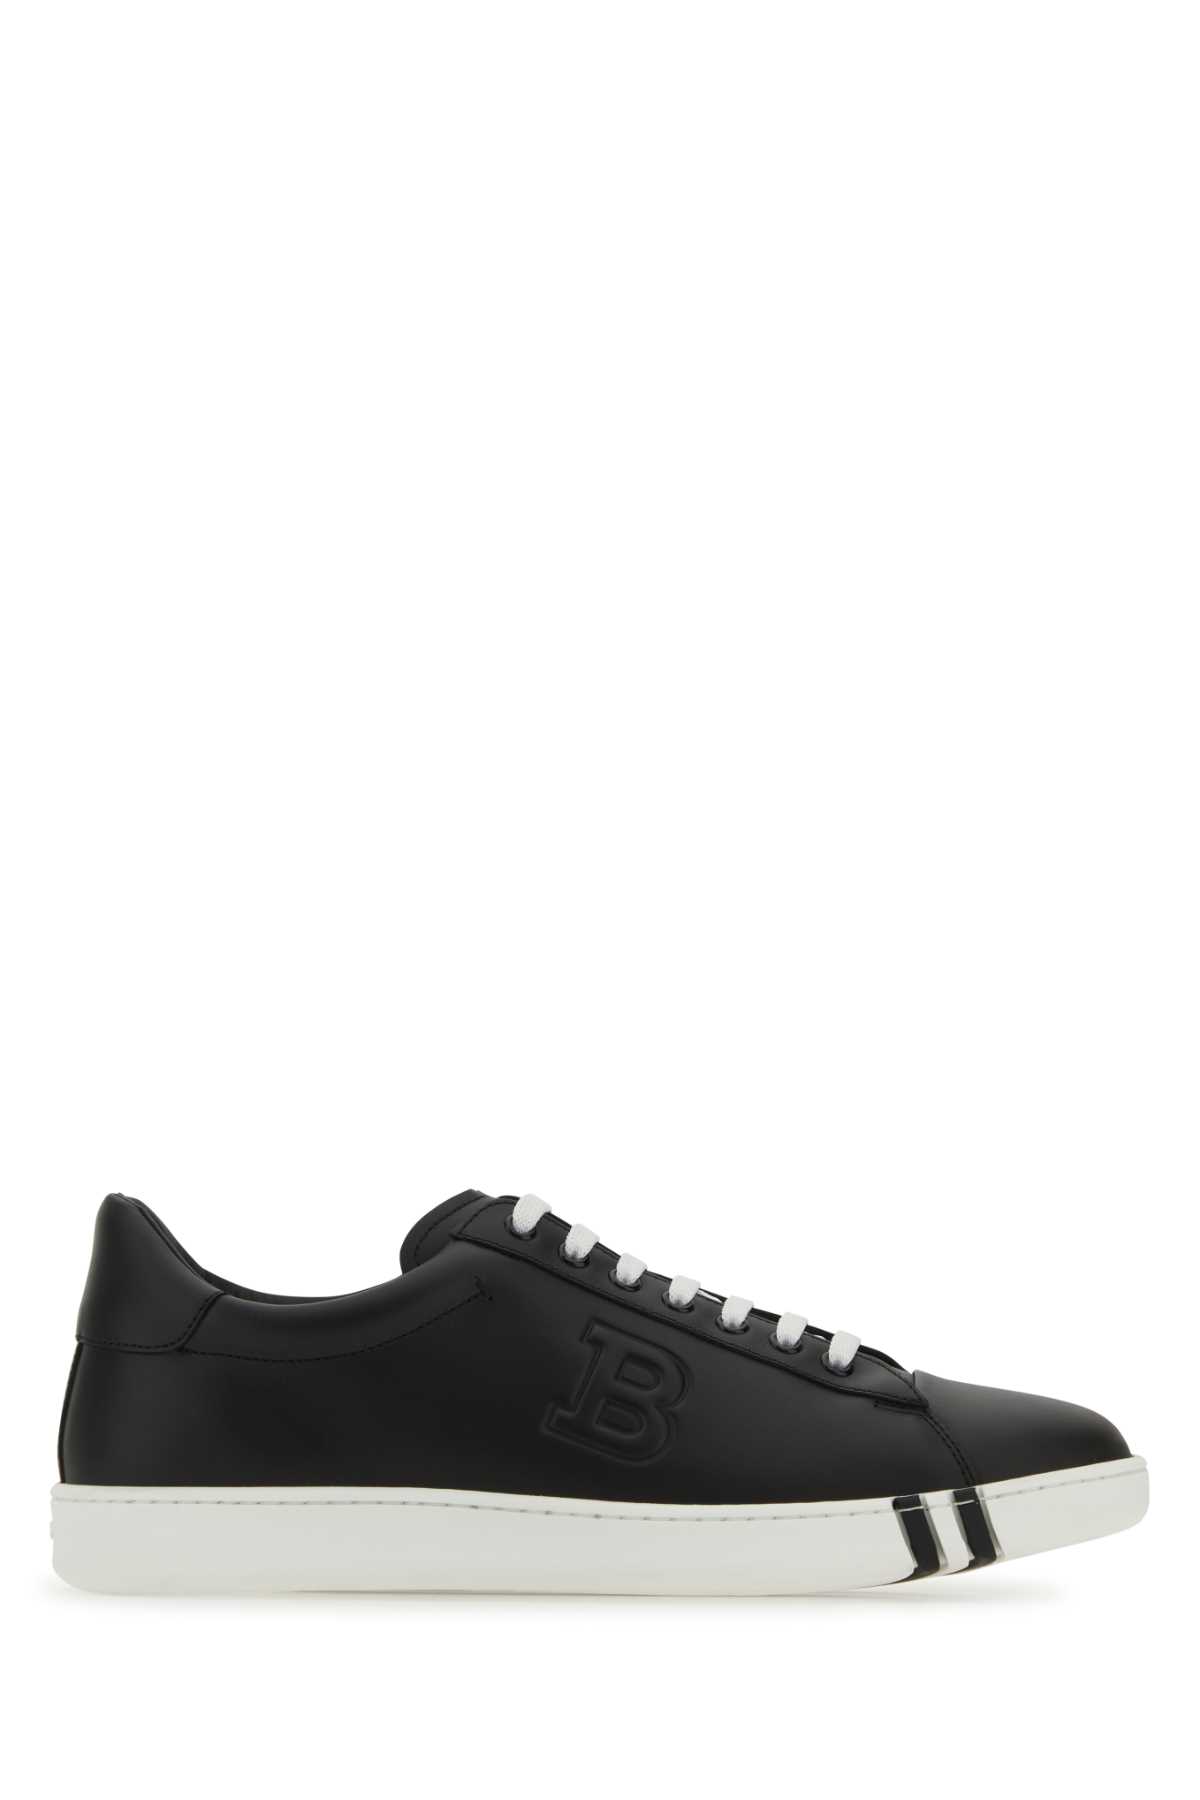 Black Leather Asher Sneakers